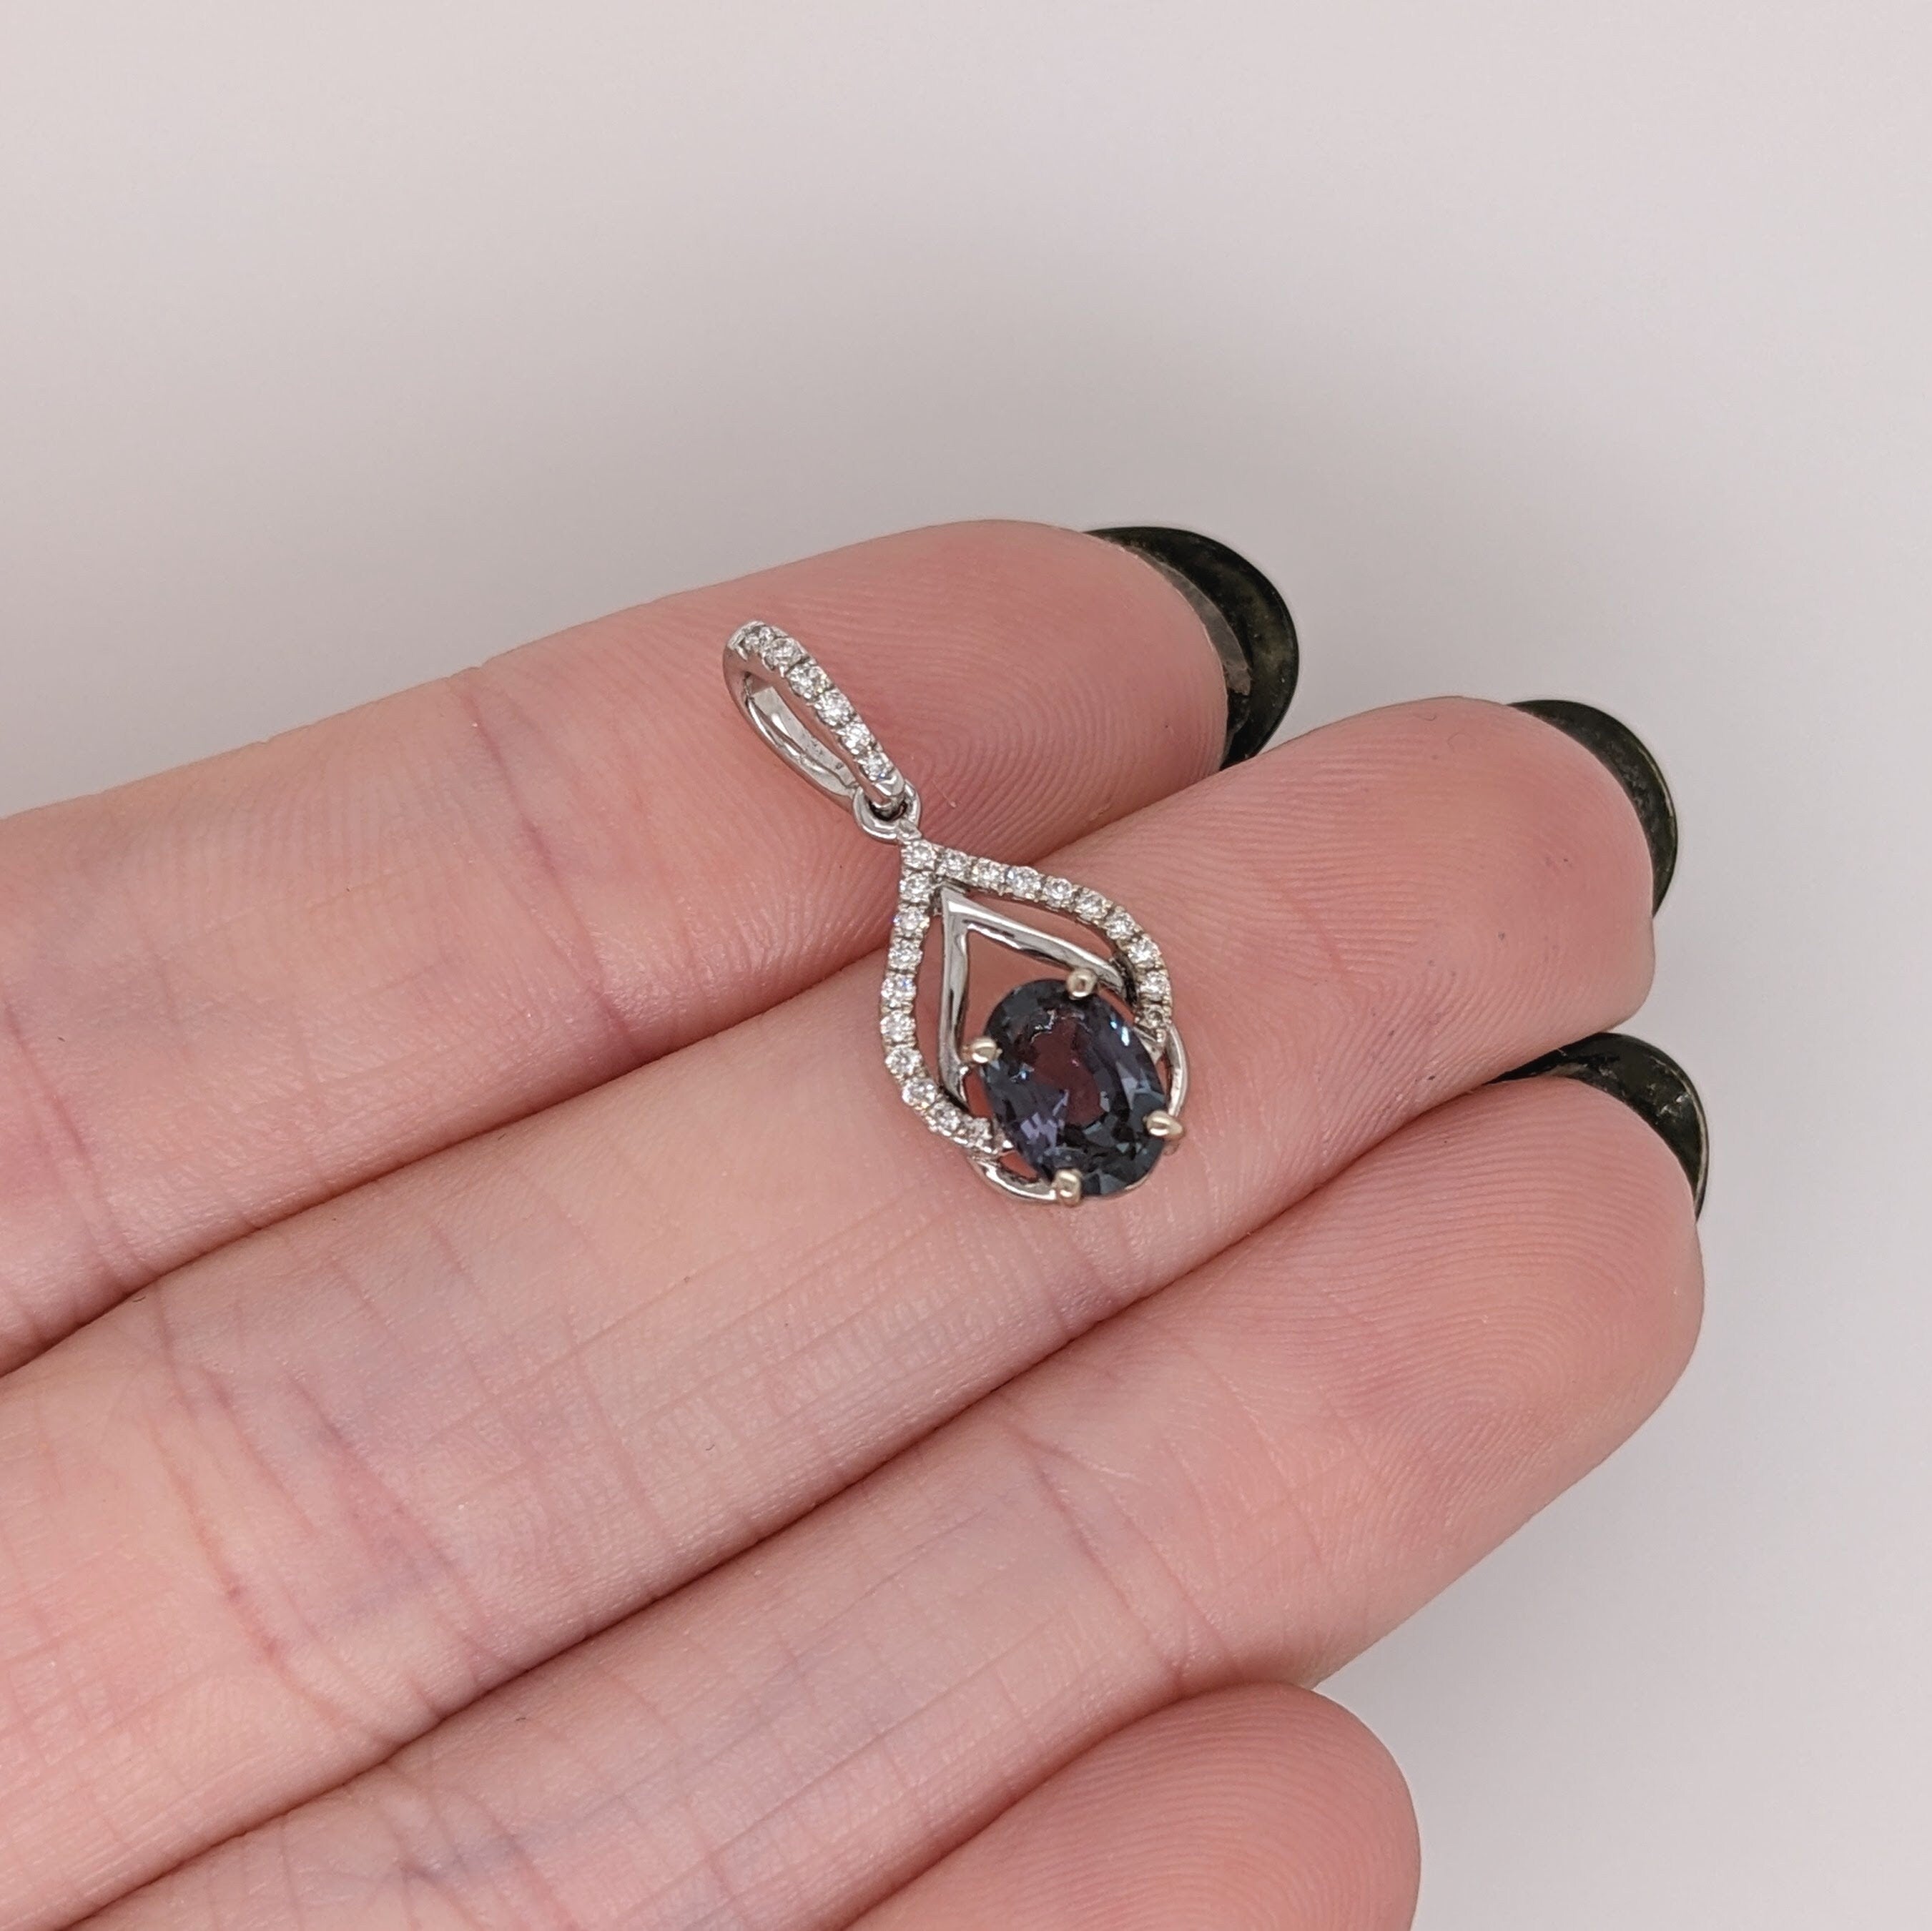 Lovely Lab Created Alexandrite Pendant in Solid 14K White Gold with Natural Diamond Accents | Oval 7x5mm | June Birthstone | Diamond Bail